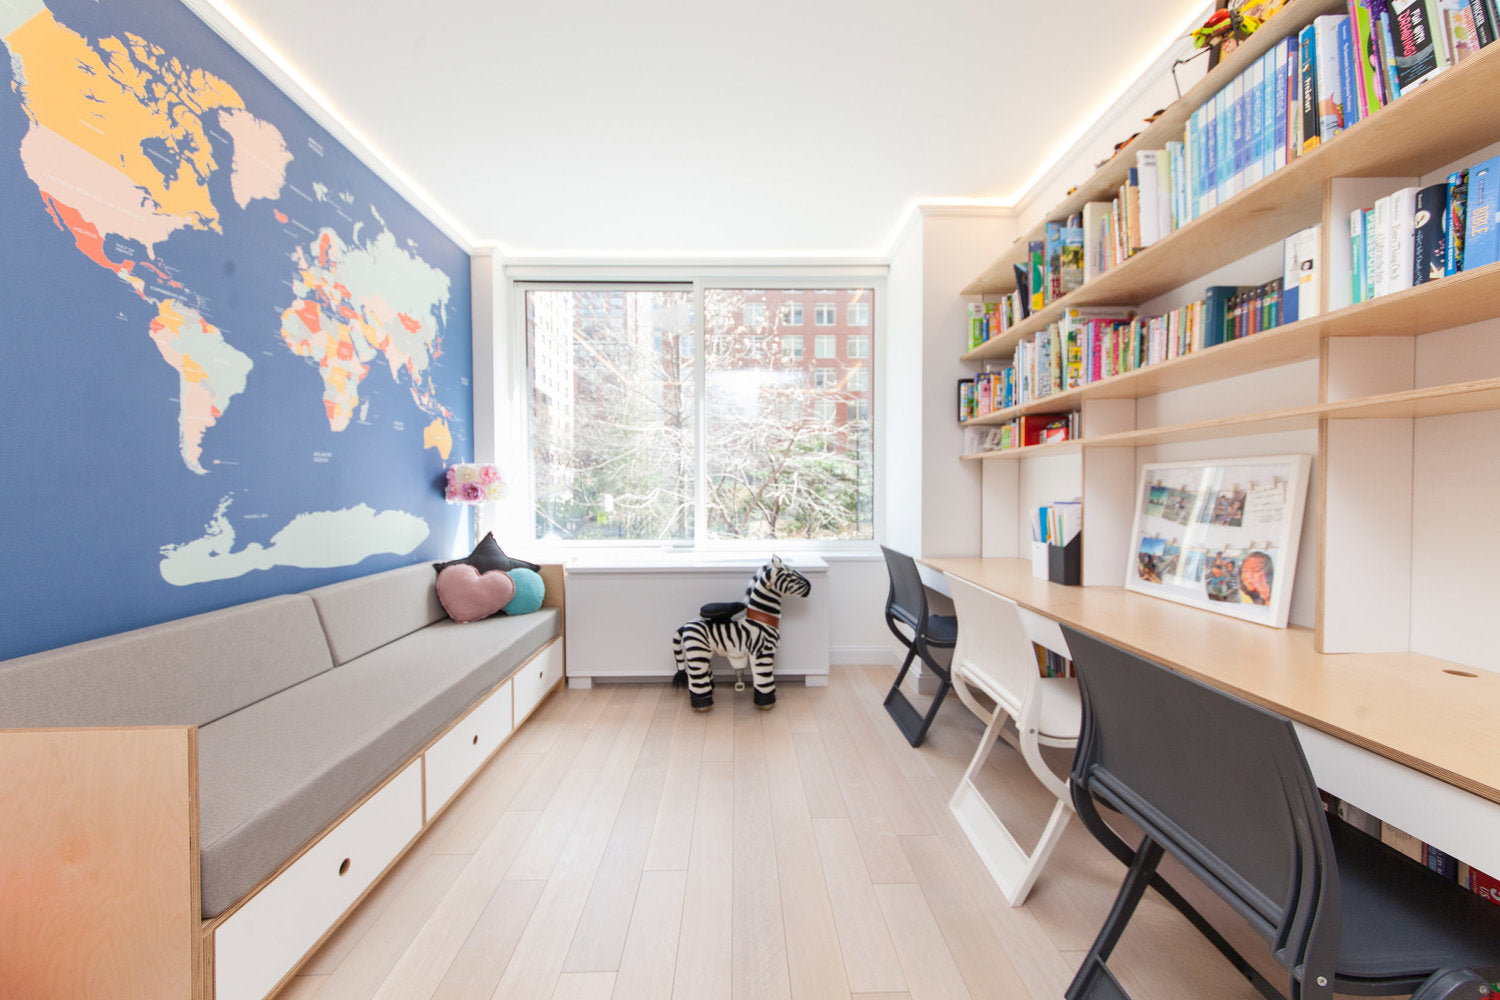 Bright room with map wall, bookshelves, desk, chairs, and window view.